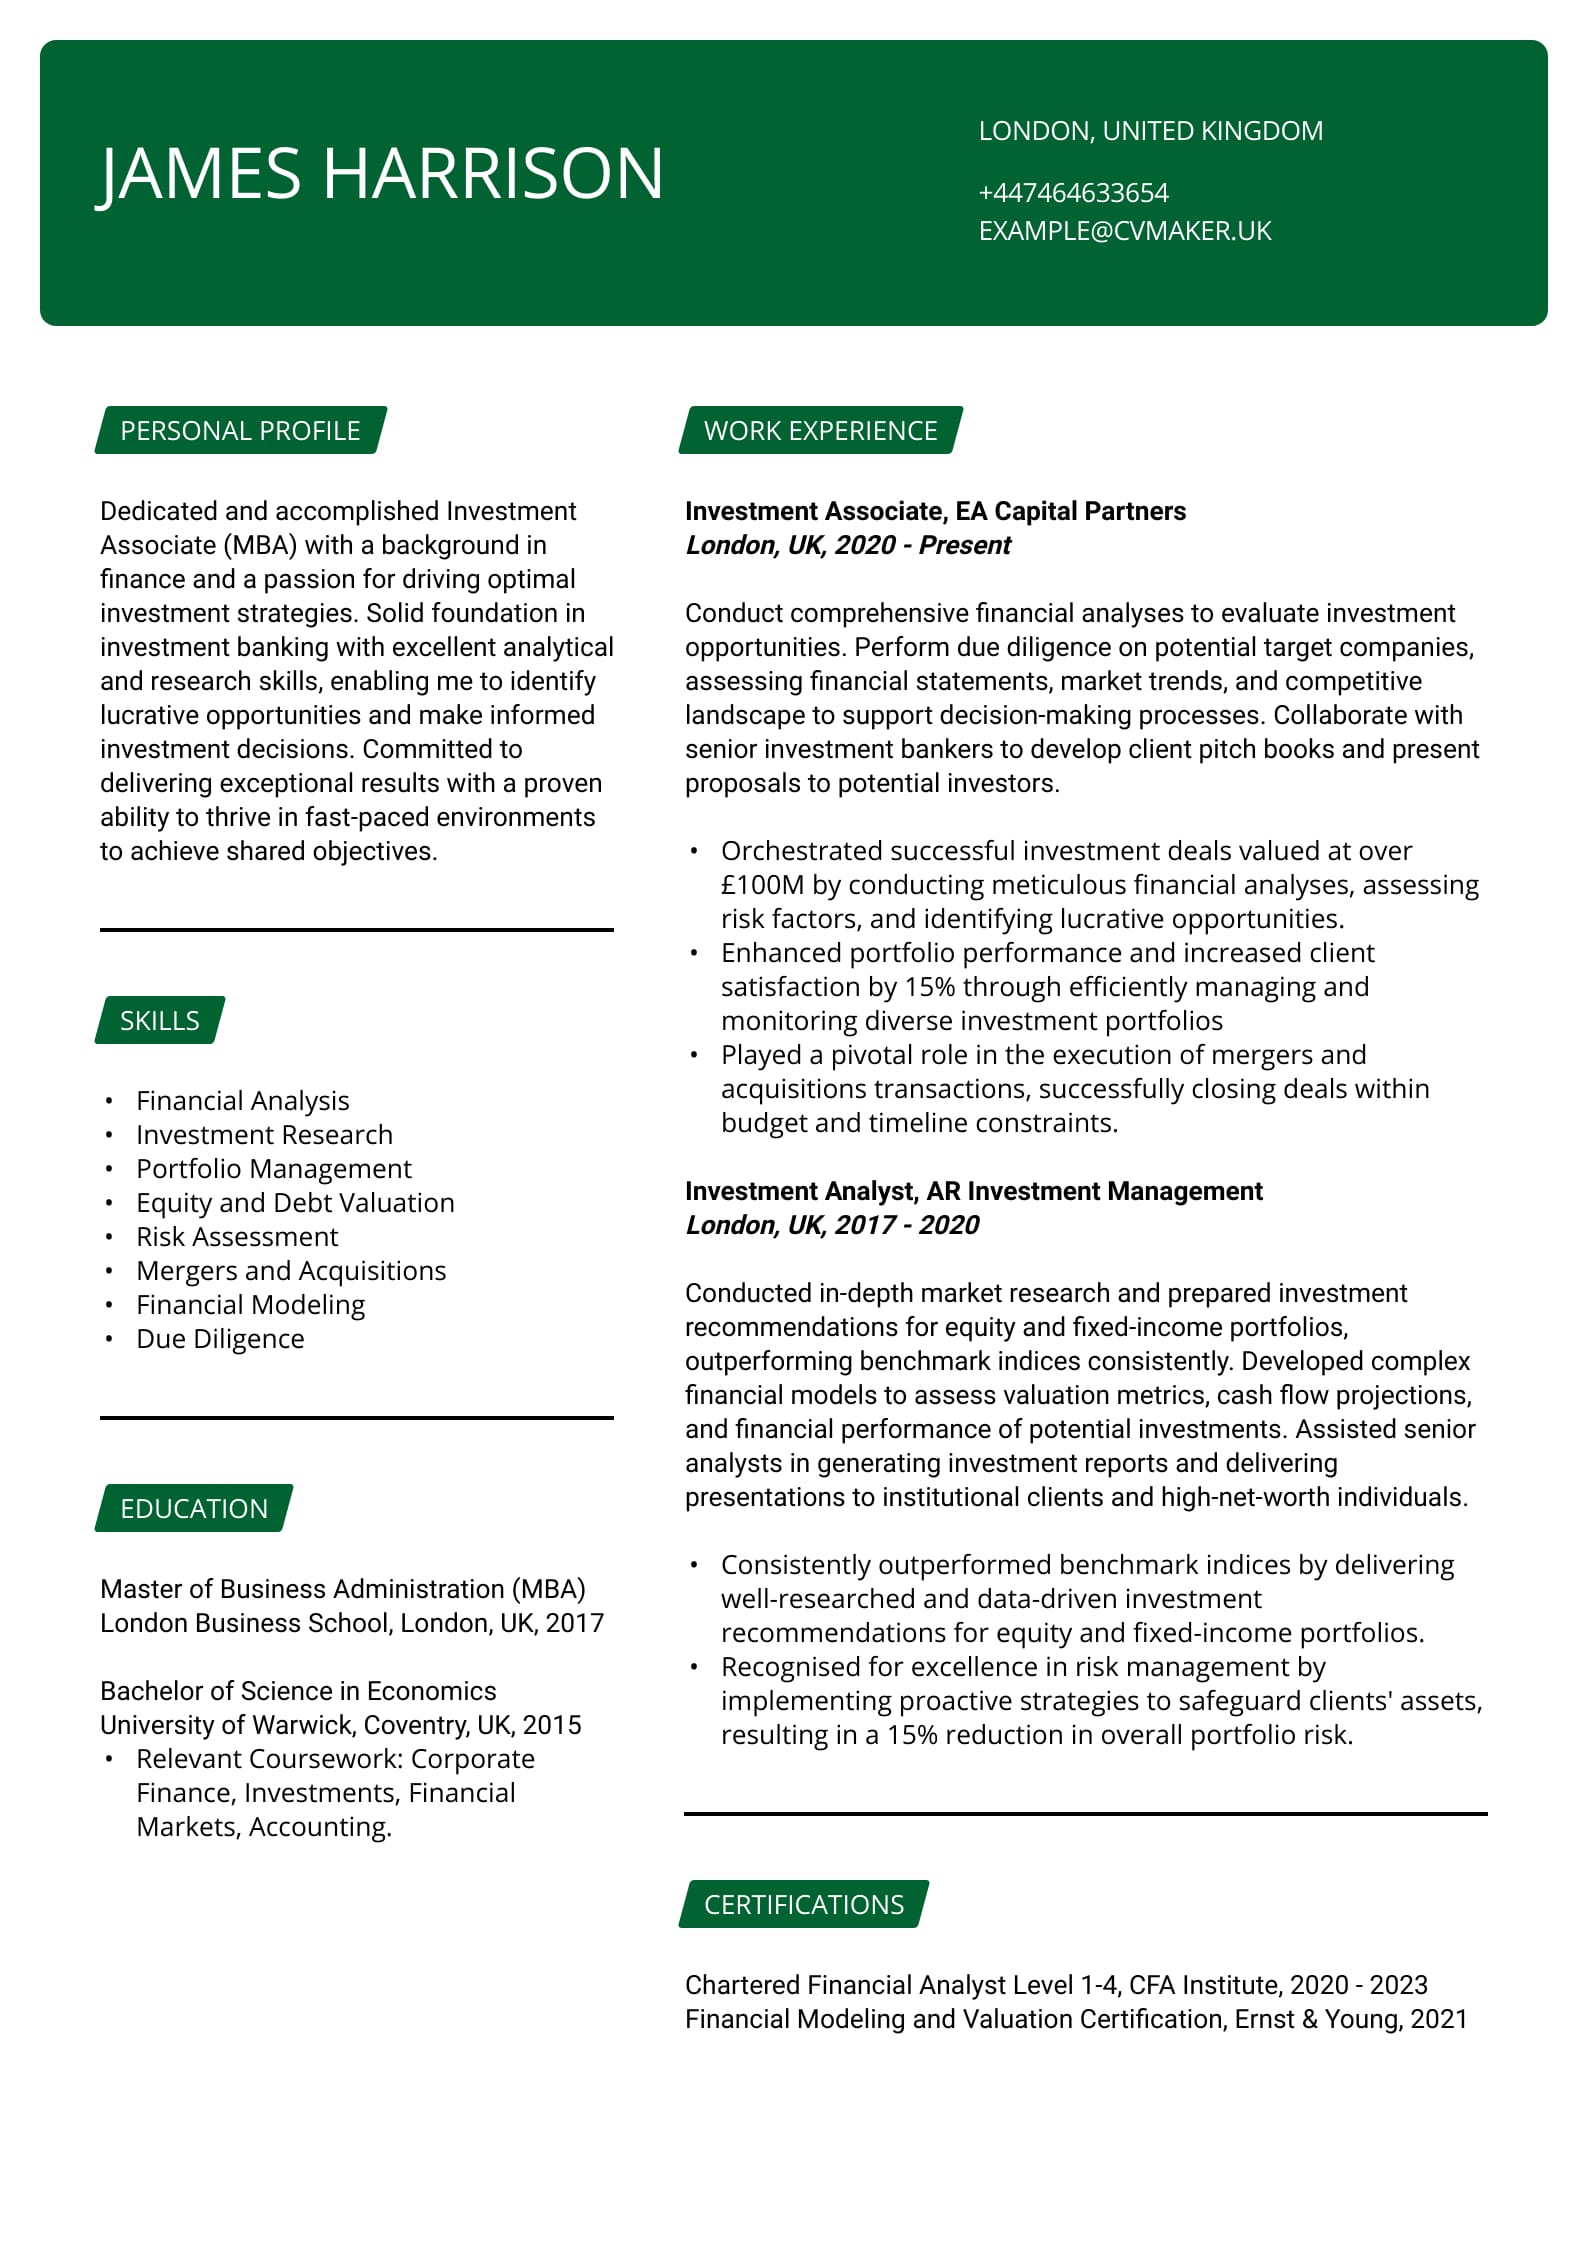 CV example - Investment Banking - Cornell template